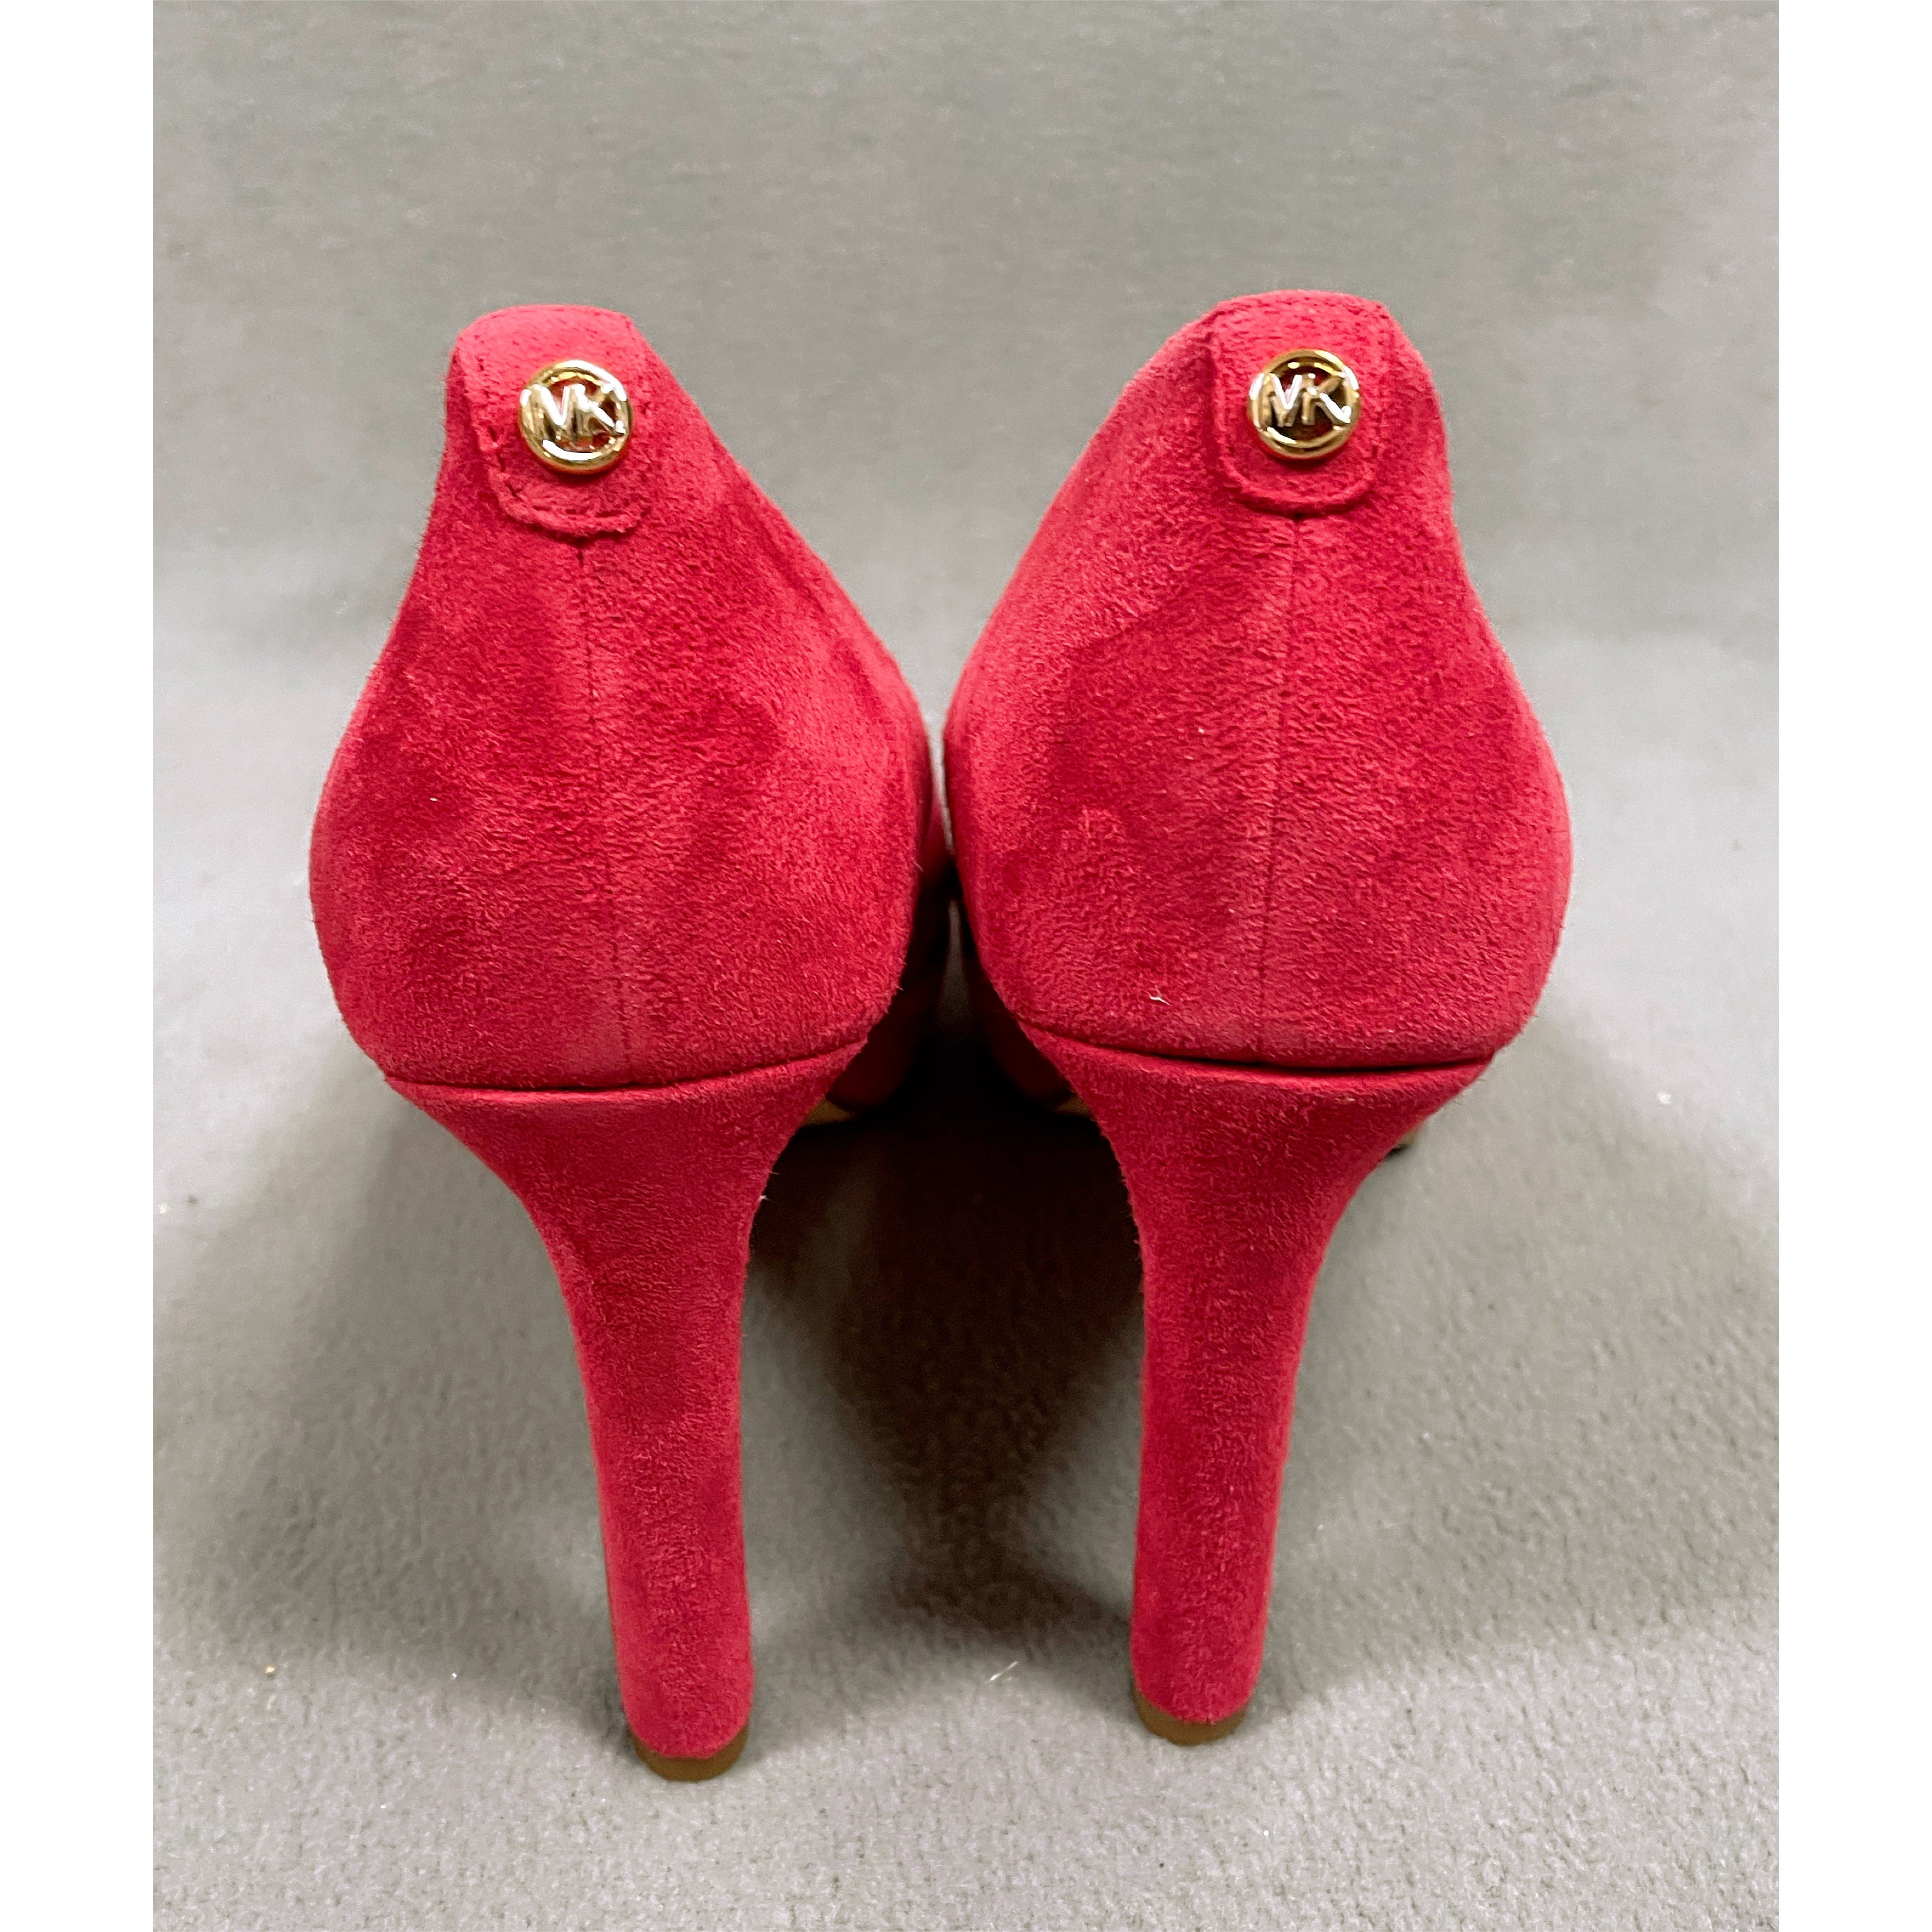 Michael Kors red suede Chantal pump, size 6.5 NEW IN BOX!